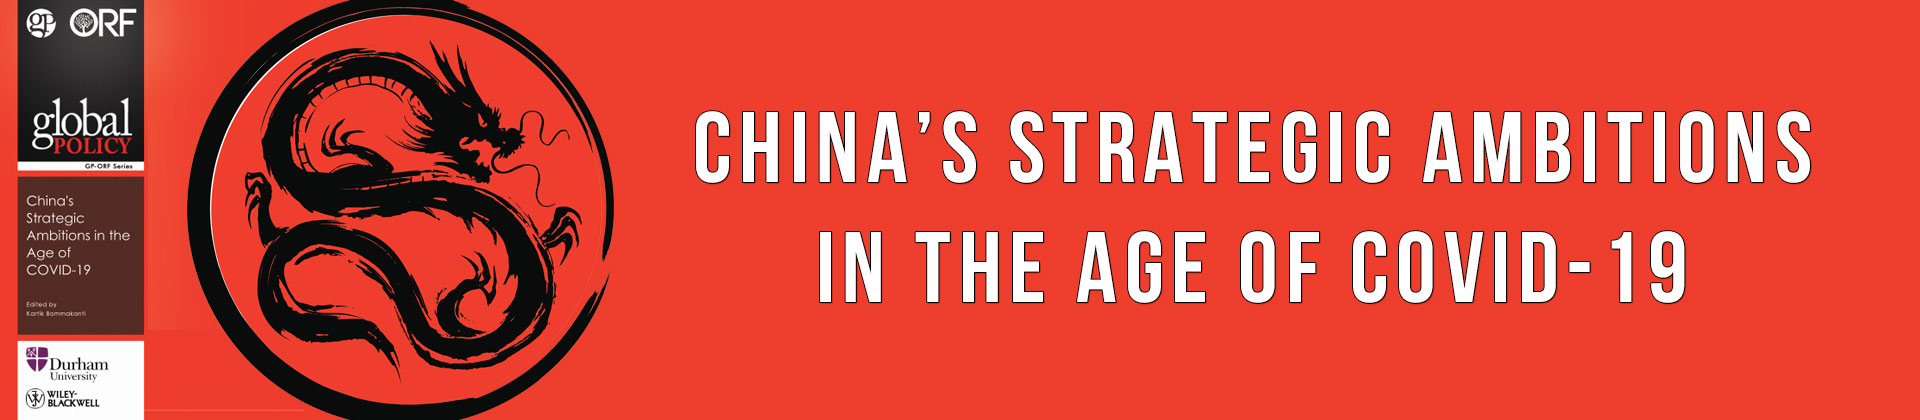 Book Launch | GP-ORF Series — China’s Strategic Ambitions in the Age of COVID-19